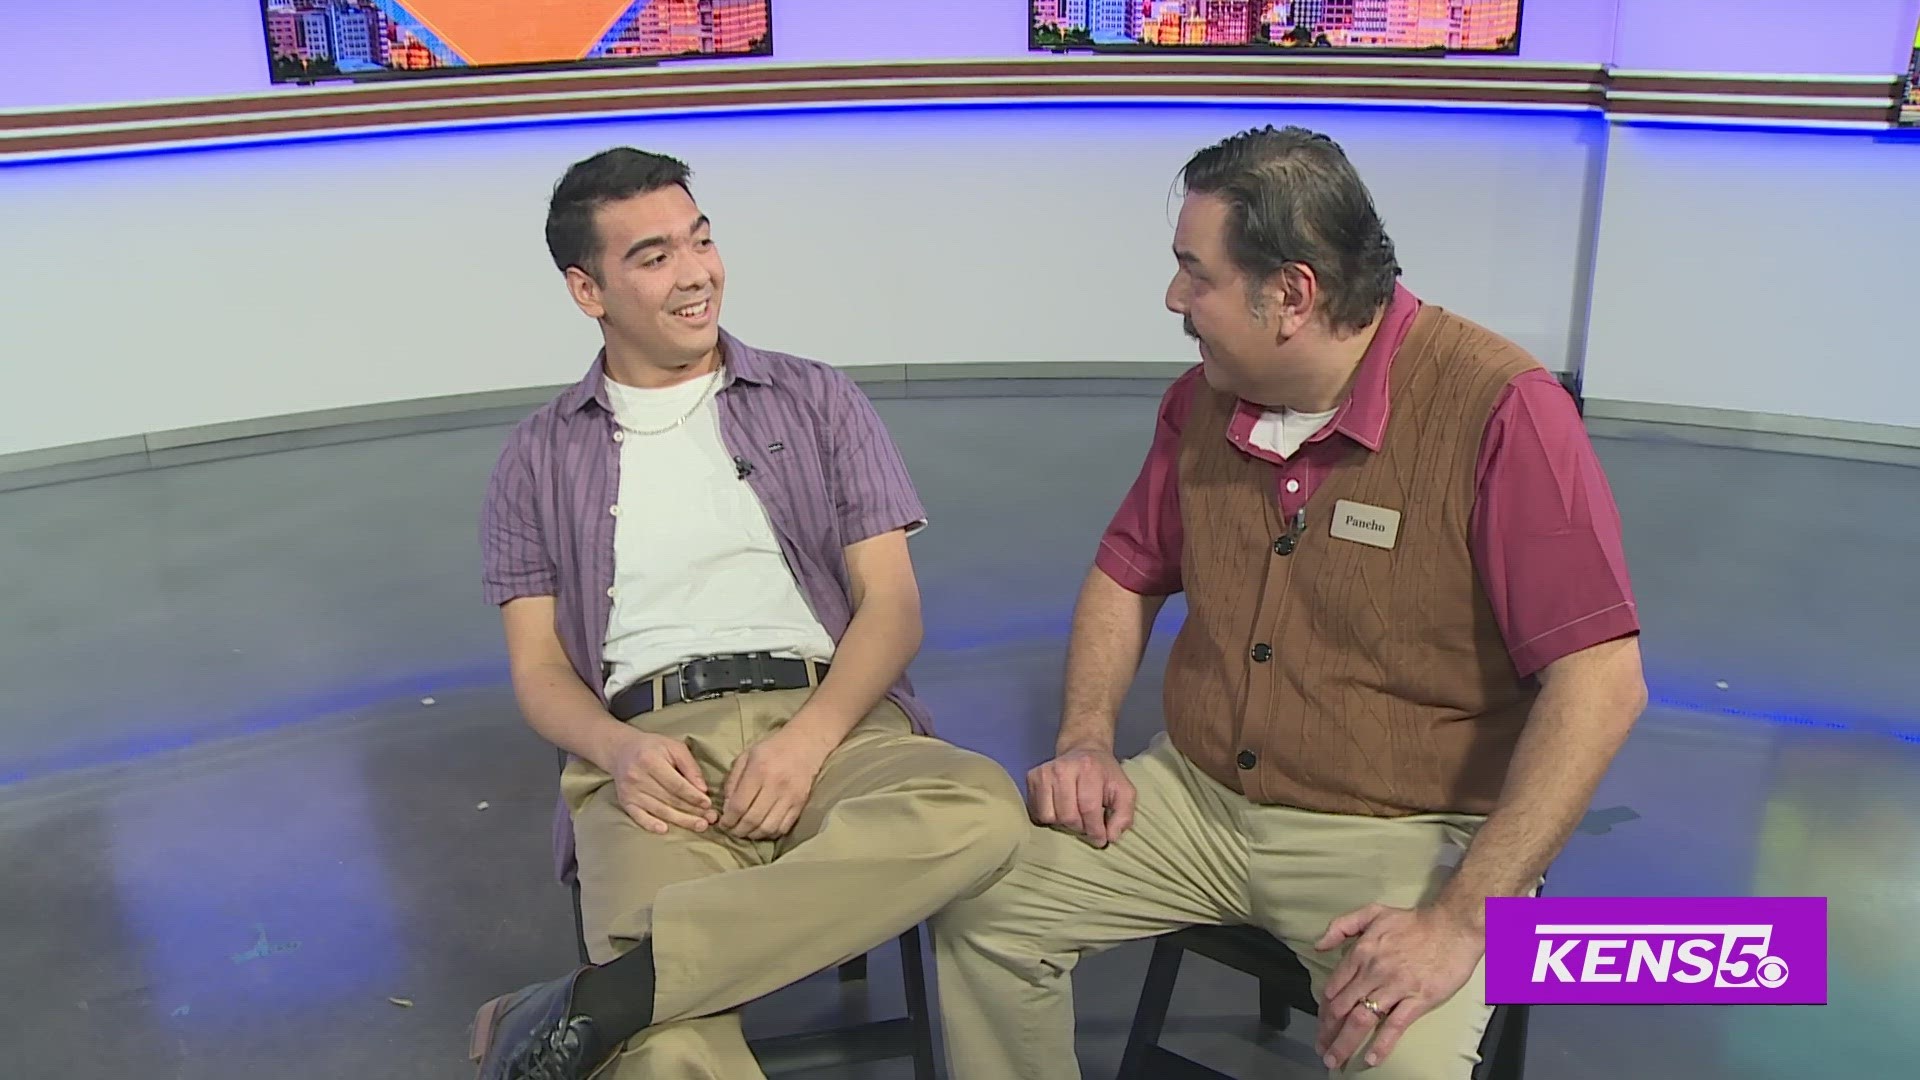 Teatro Audaz stops by to show a preview of their upcoming holiday performance of "It's a Wonderful Vida".